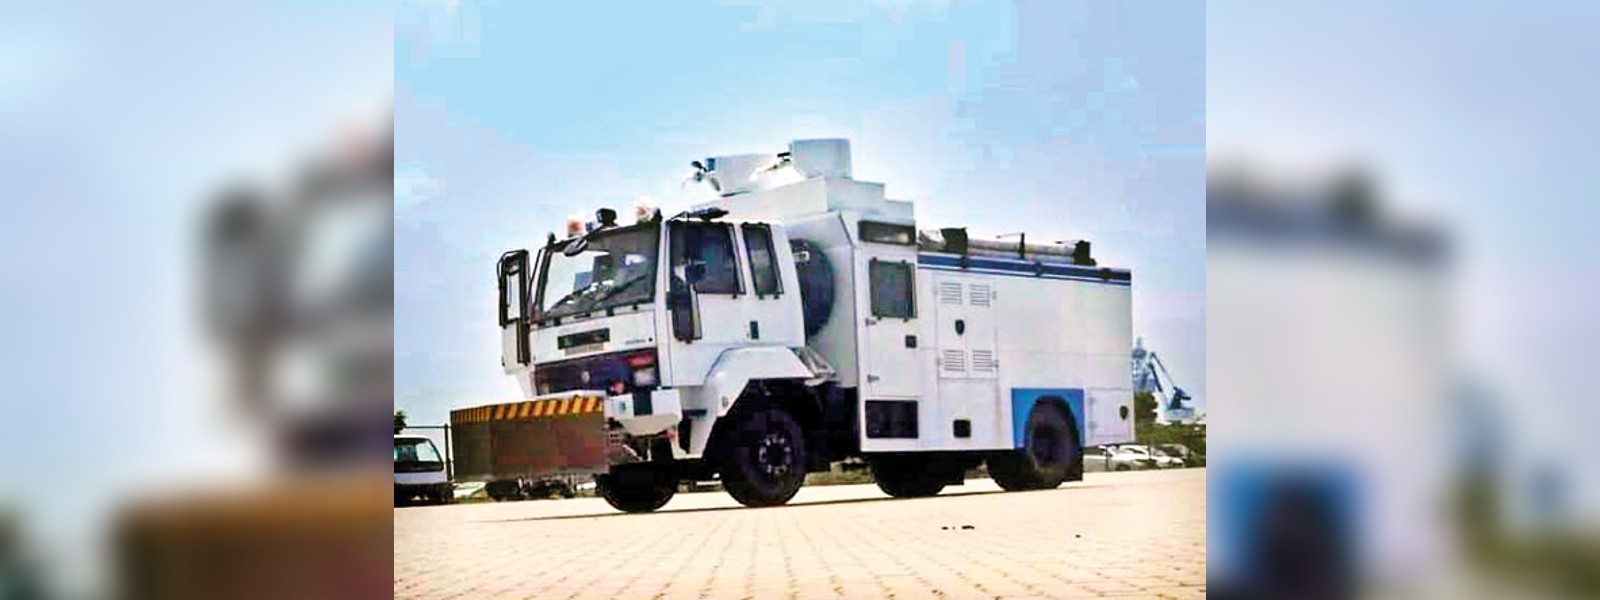 Police clarification on White Water Cannon Truck